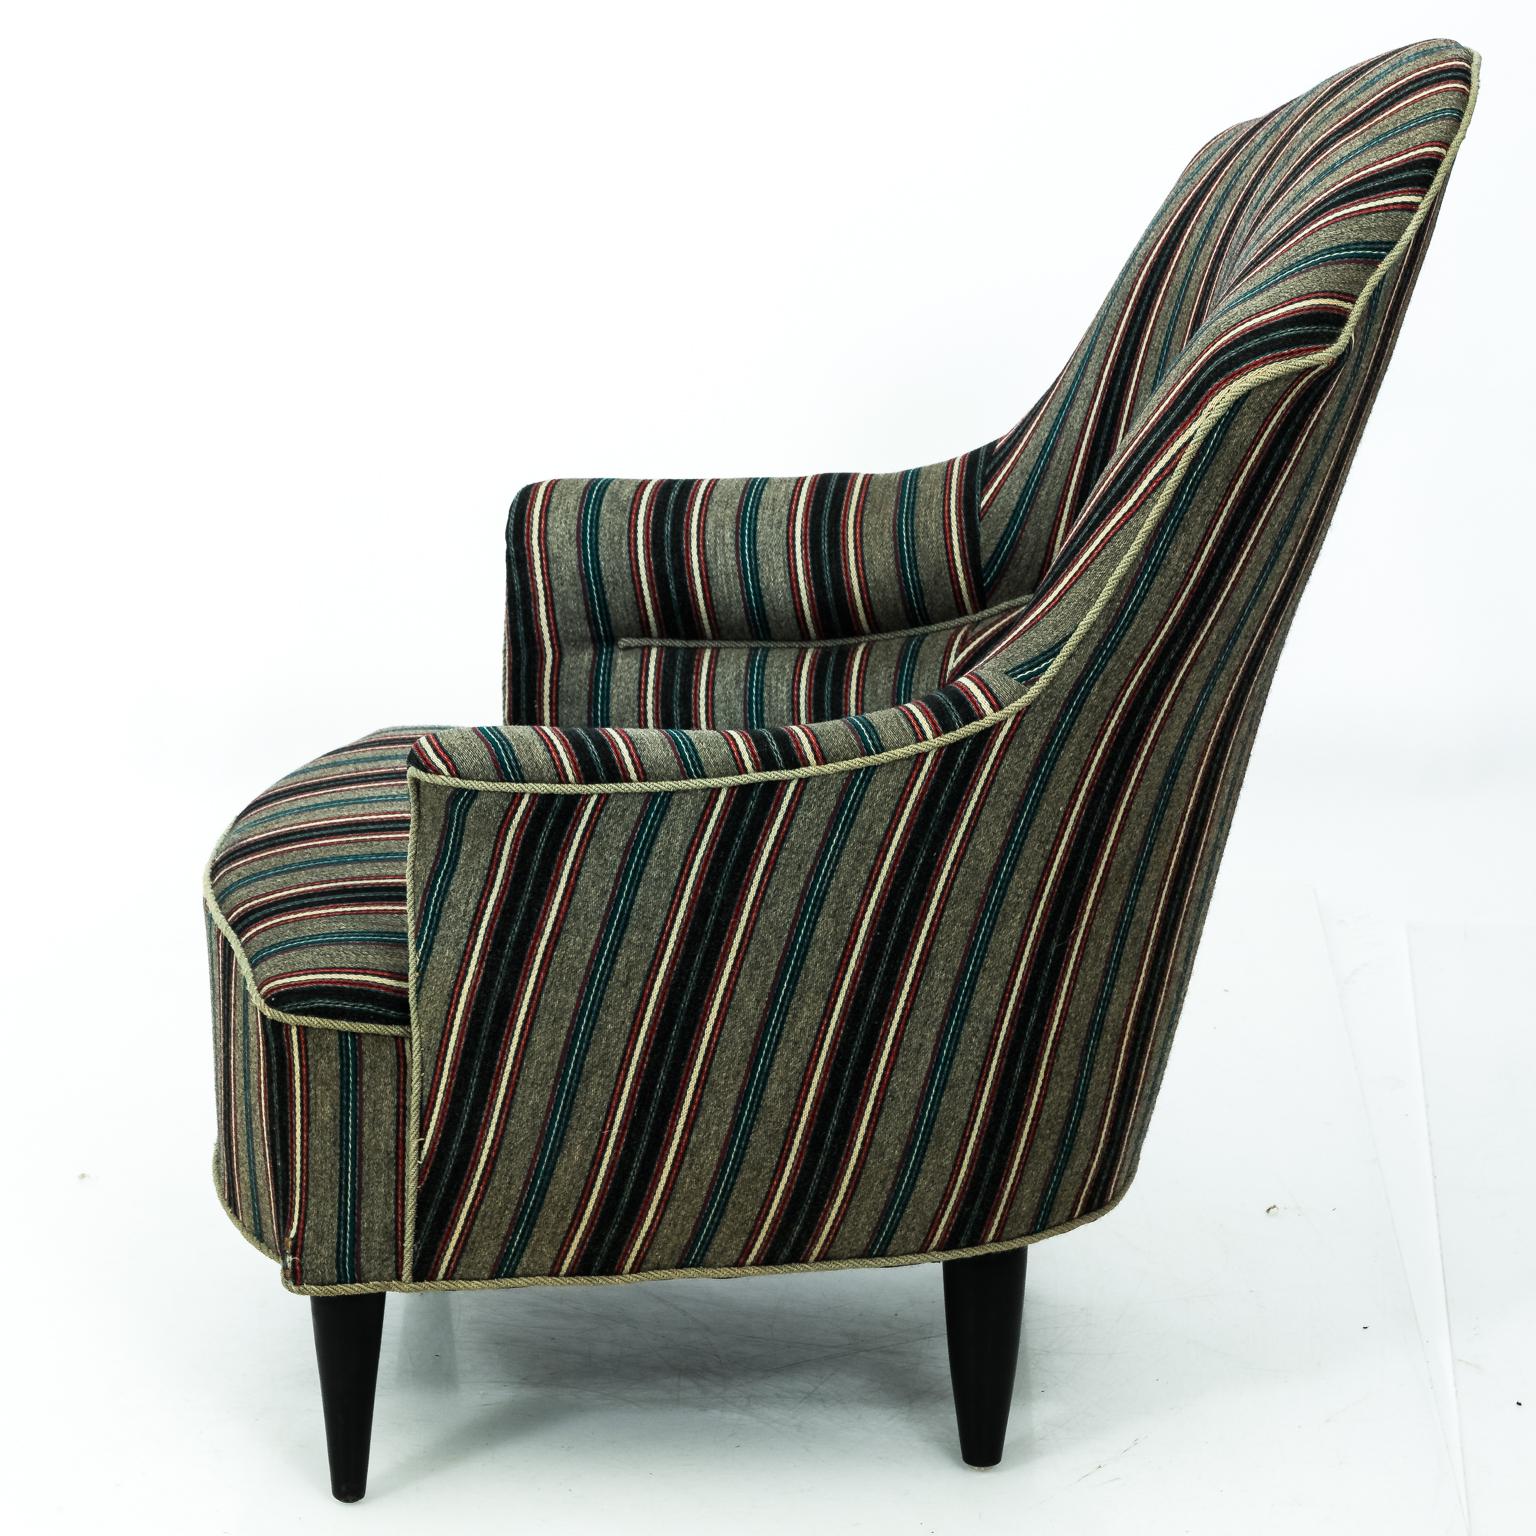 Curved back slipper chair with woolen striped upholstery on black painted legs, circa 1970s.
 